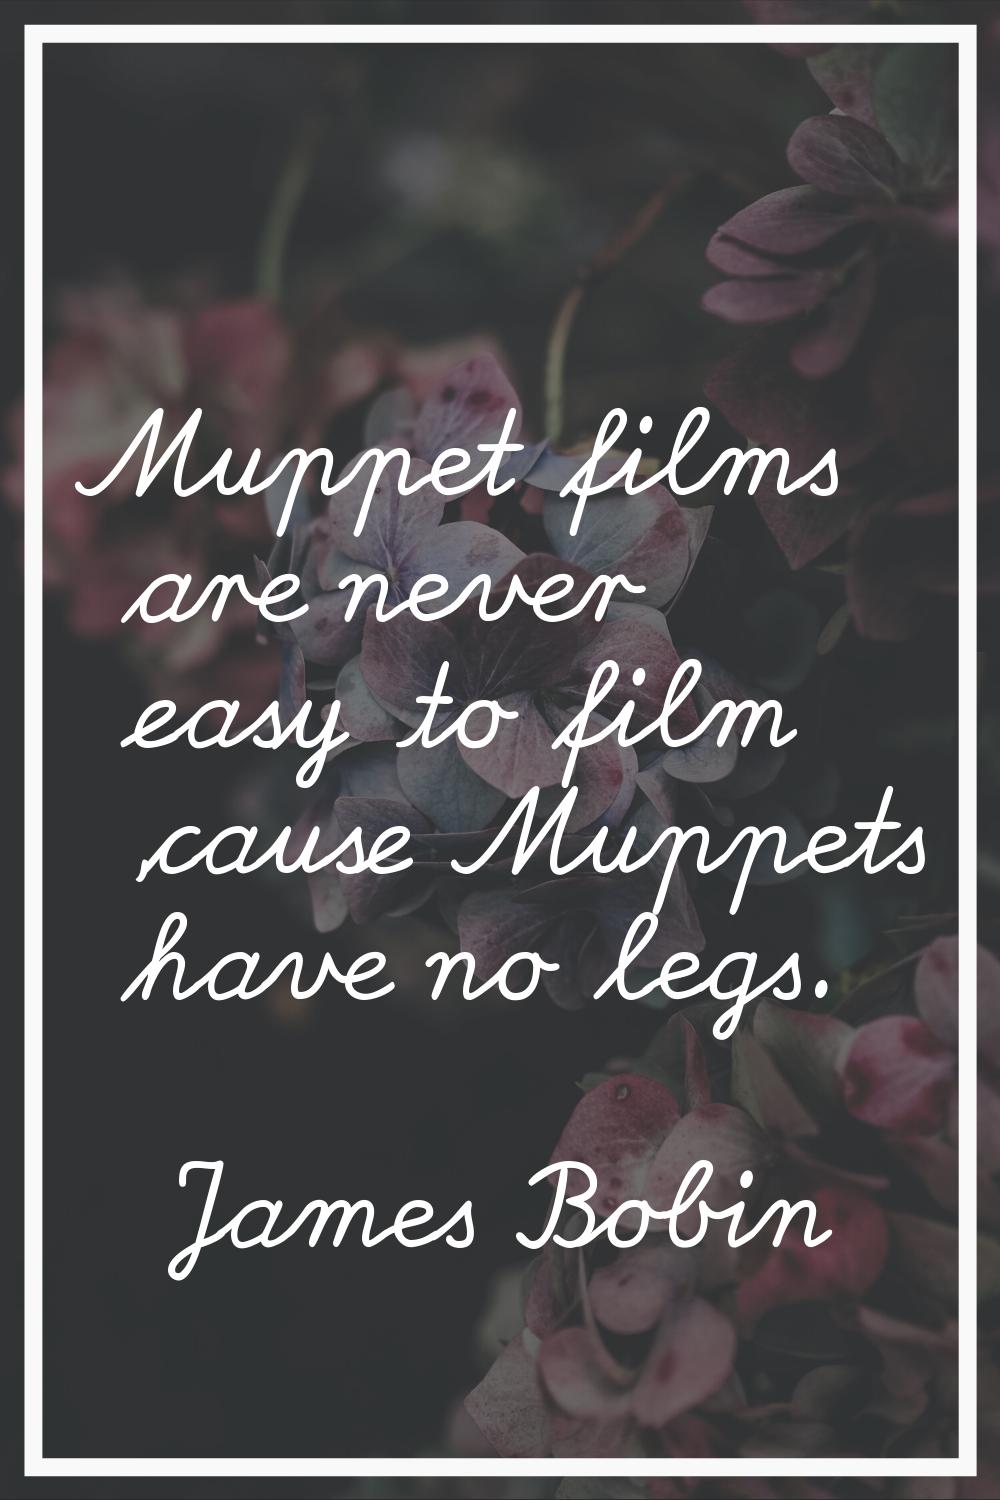 Muppet films are never easy to film 'cause Muppets have no legs.